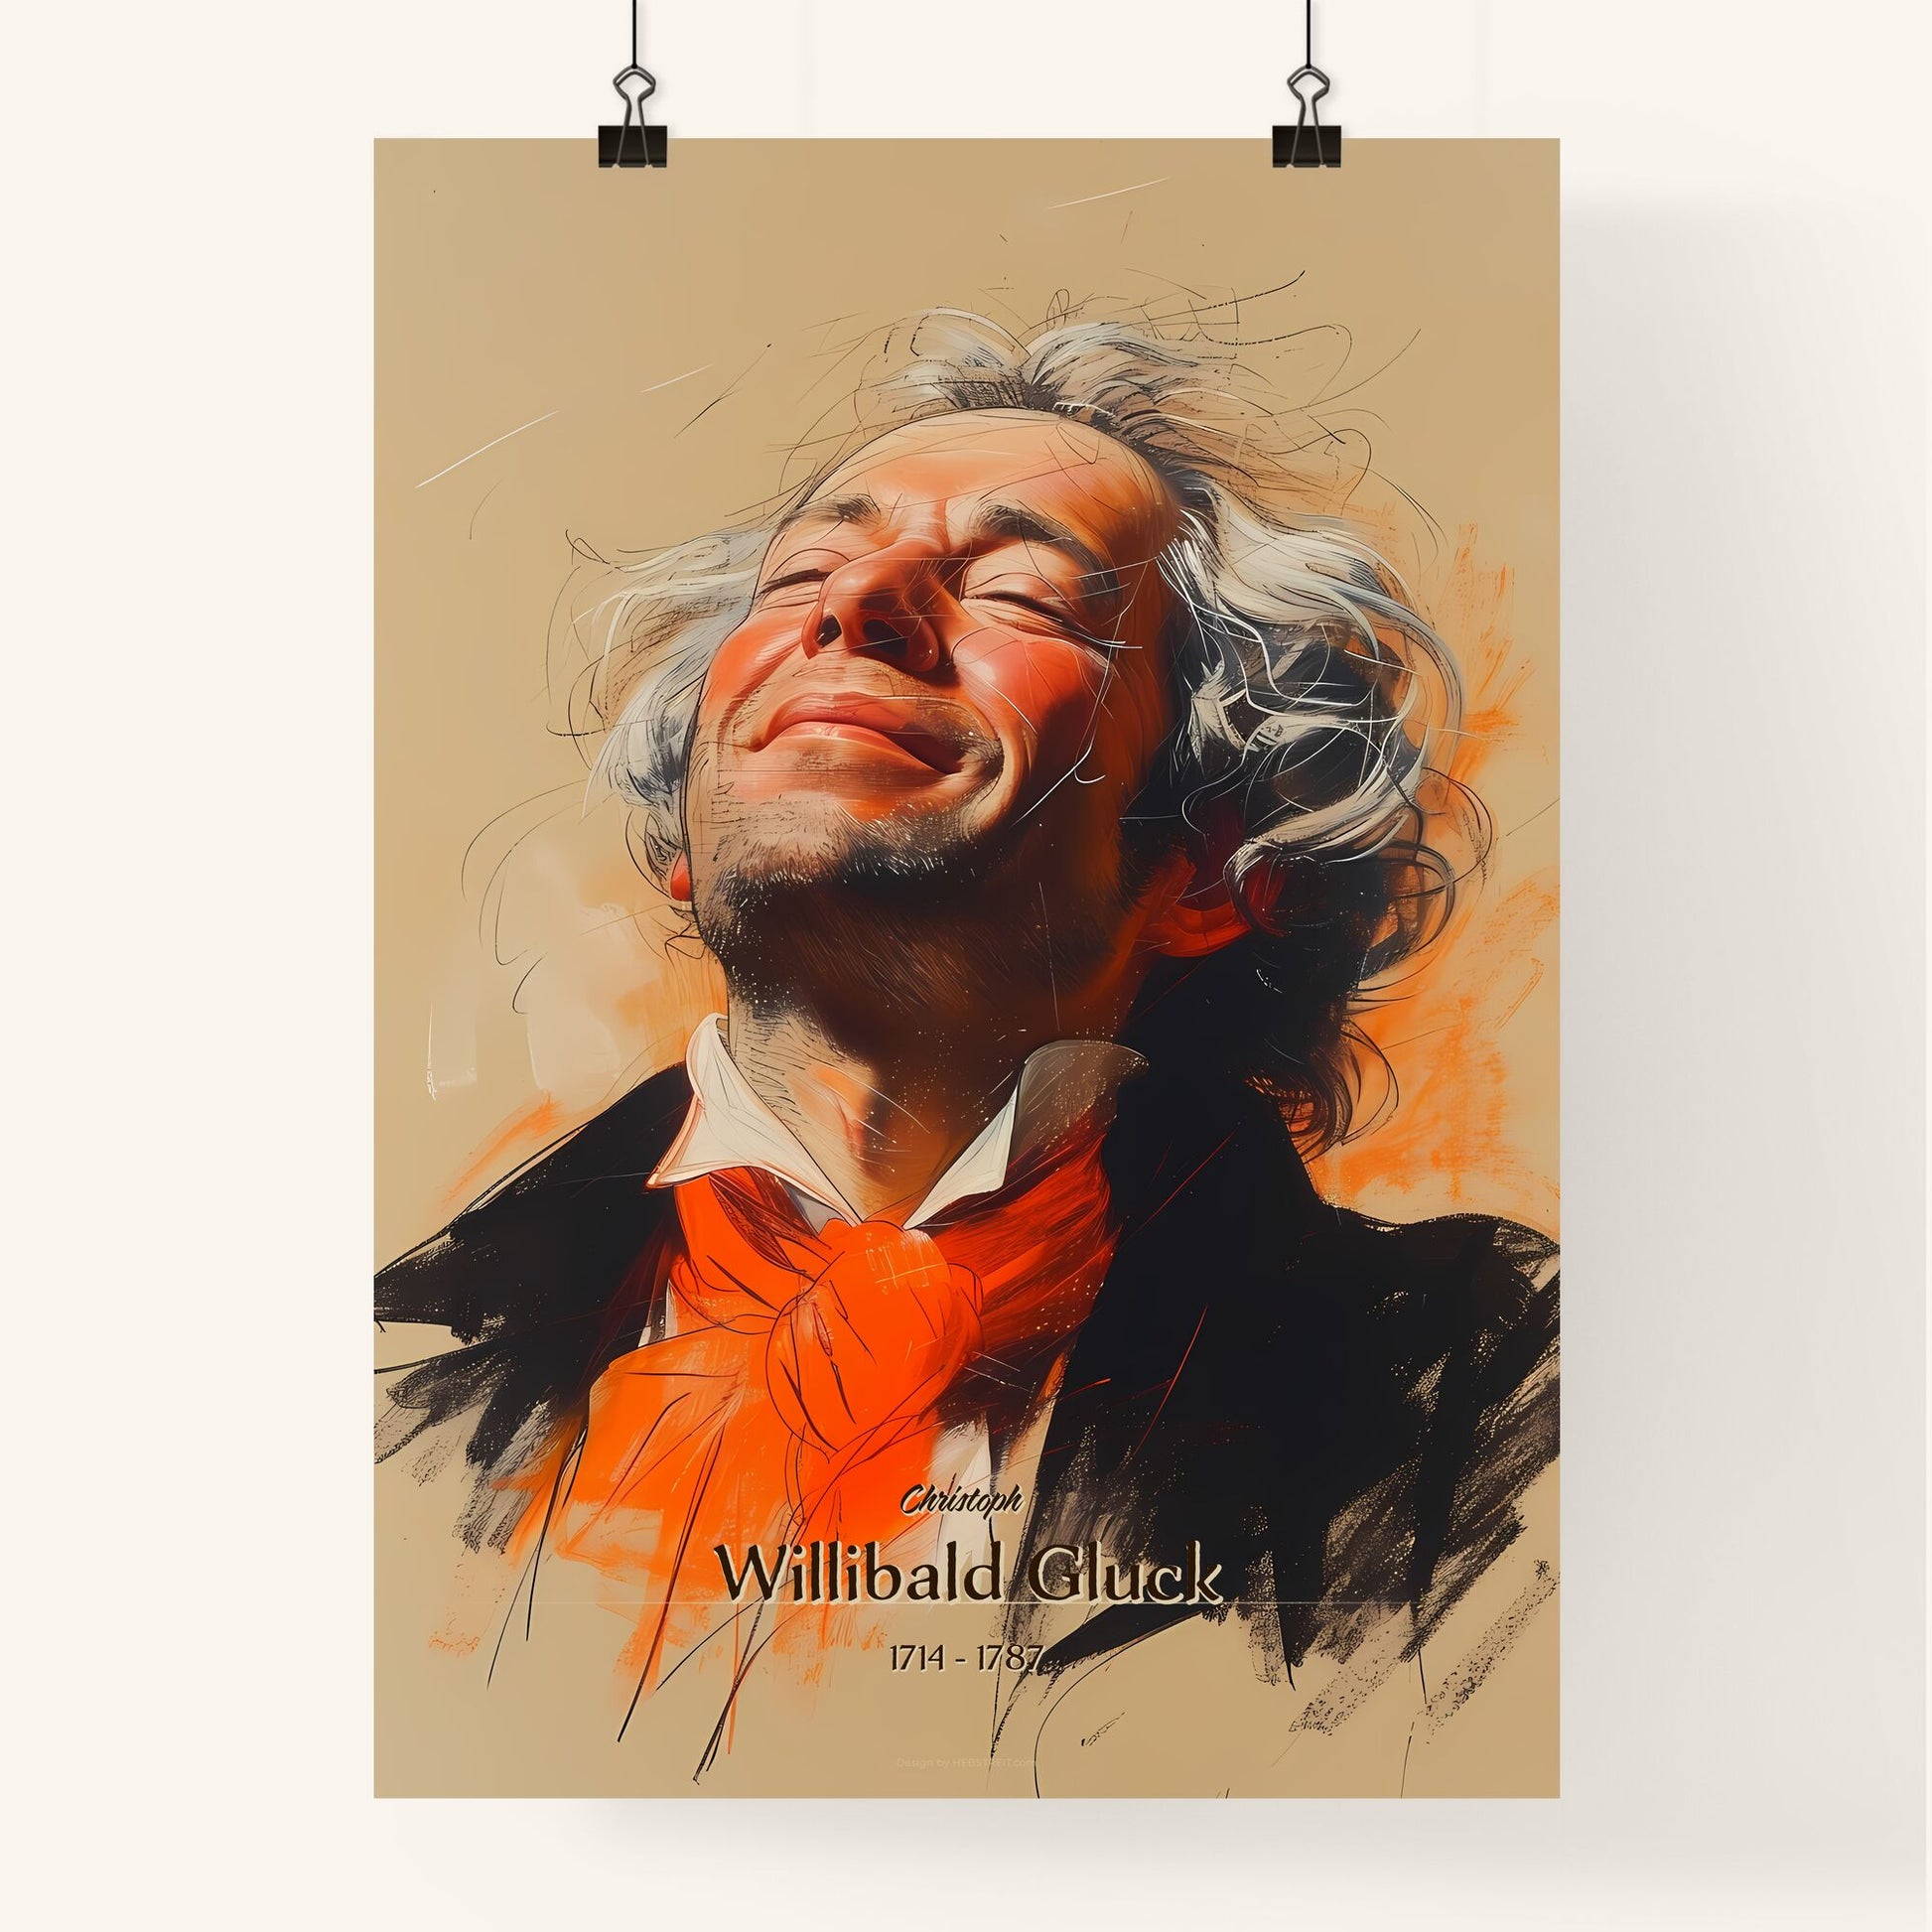 Christoph, Willibald Gluck, 1714 - 1787, A Poster of a man with his eyes closed Default Title